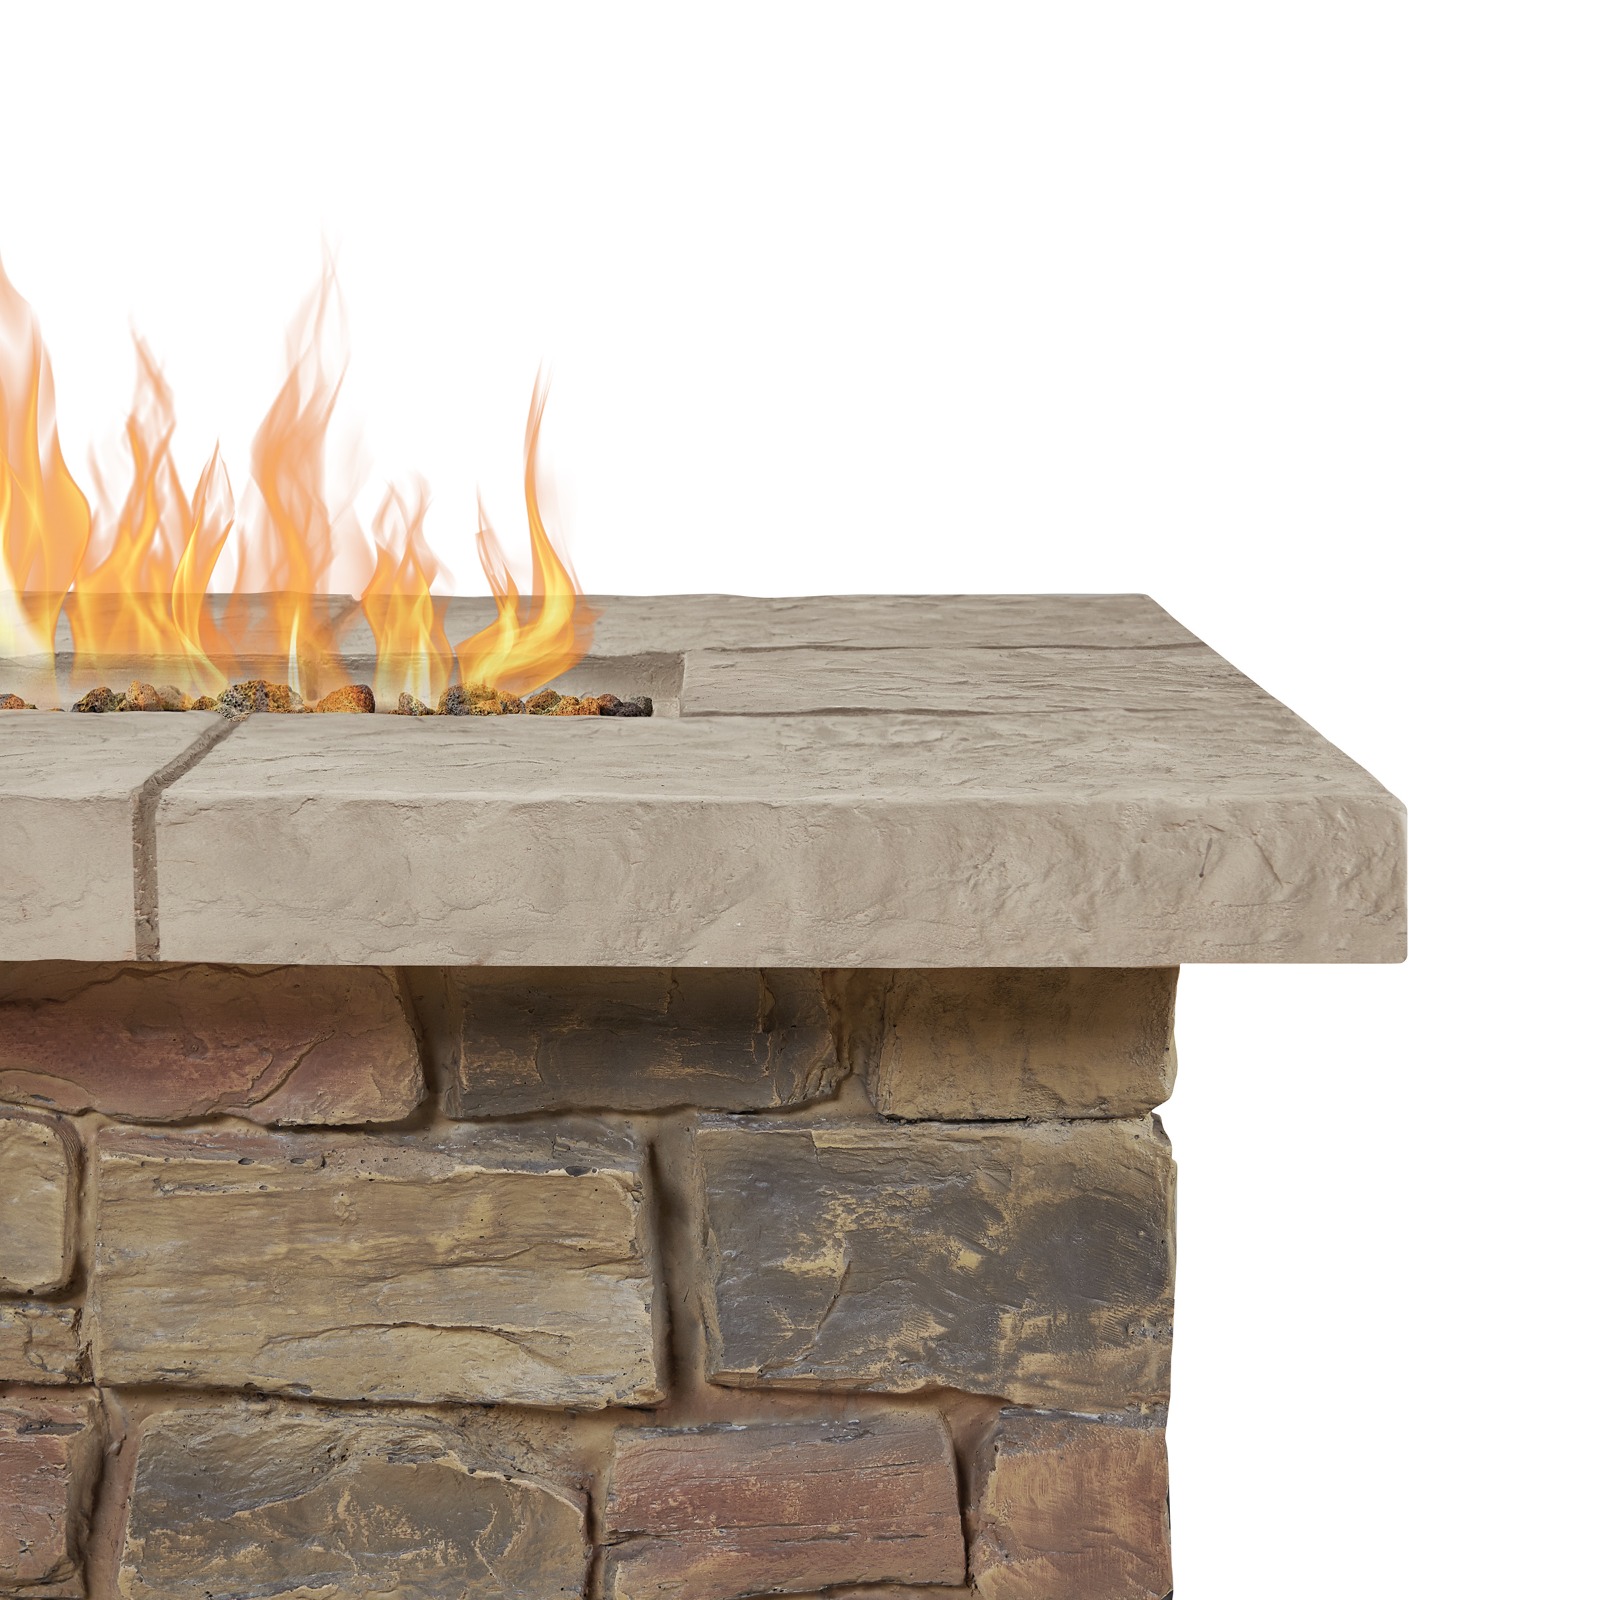 Sedona 66" Rectangle Propane Fire Pit Outdoor Fireplace Fire Table for Backyard or Patio